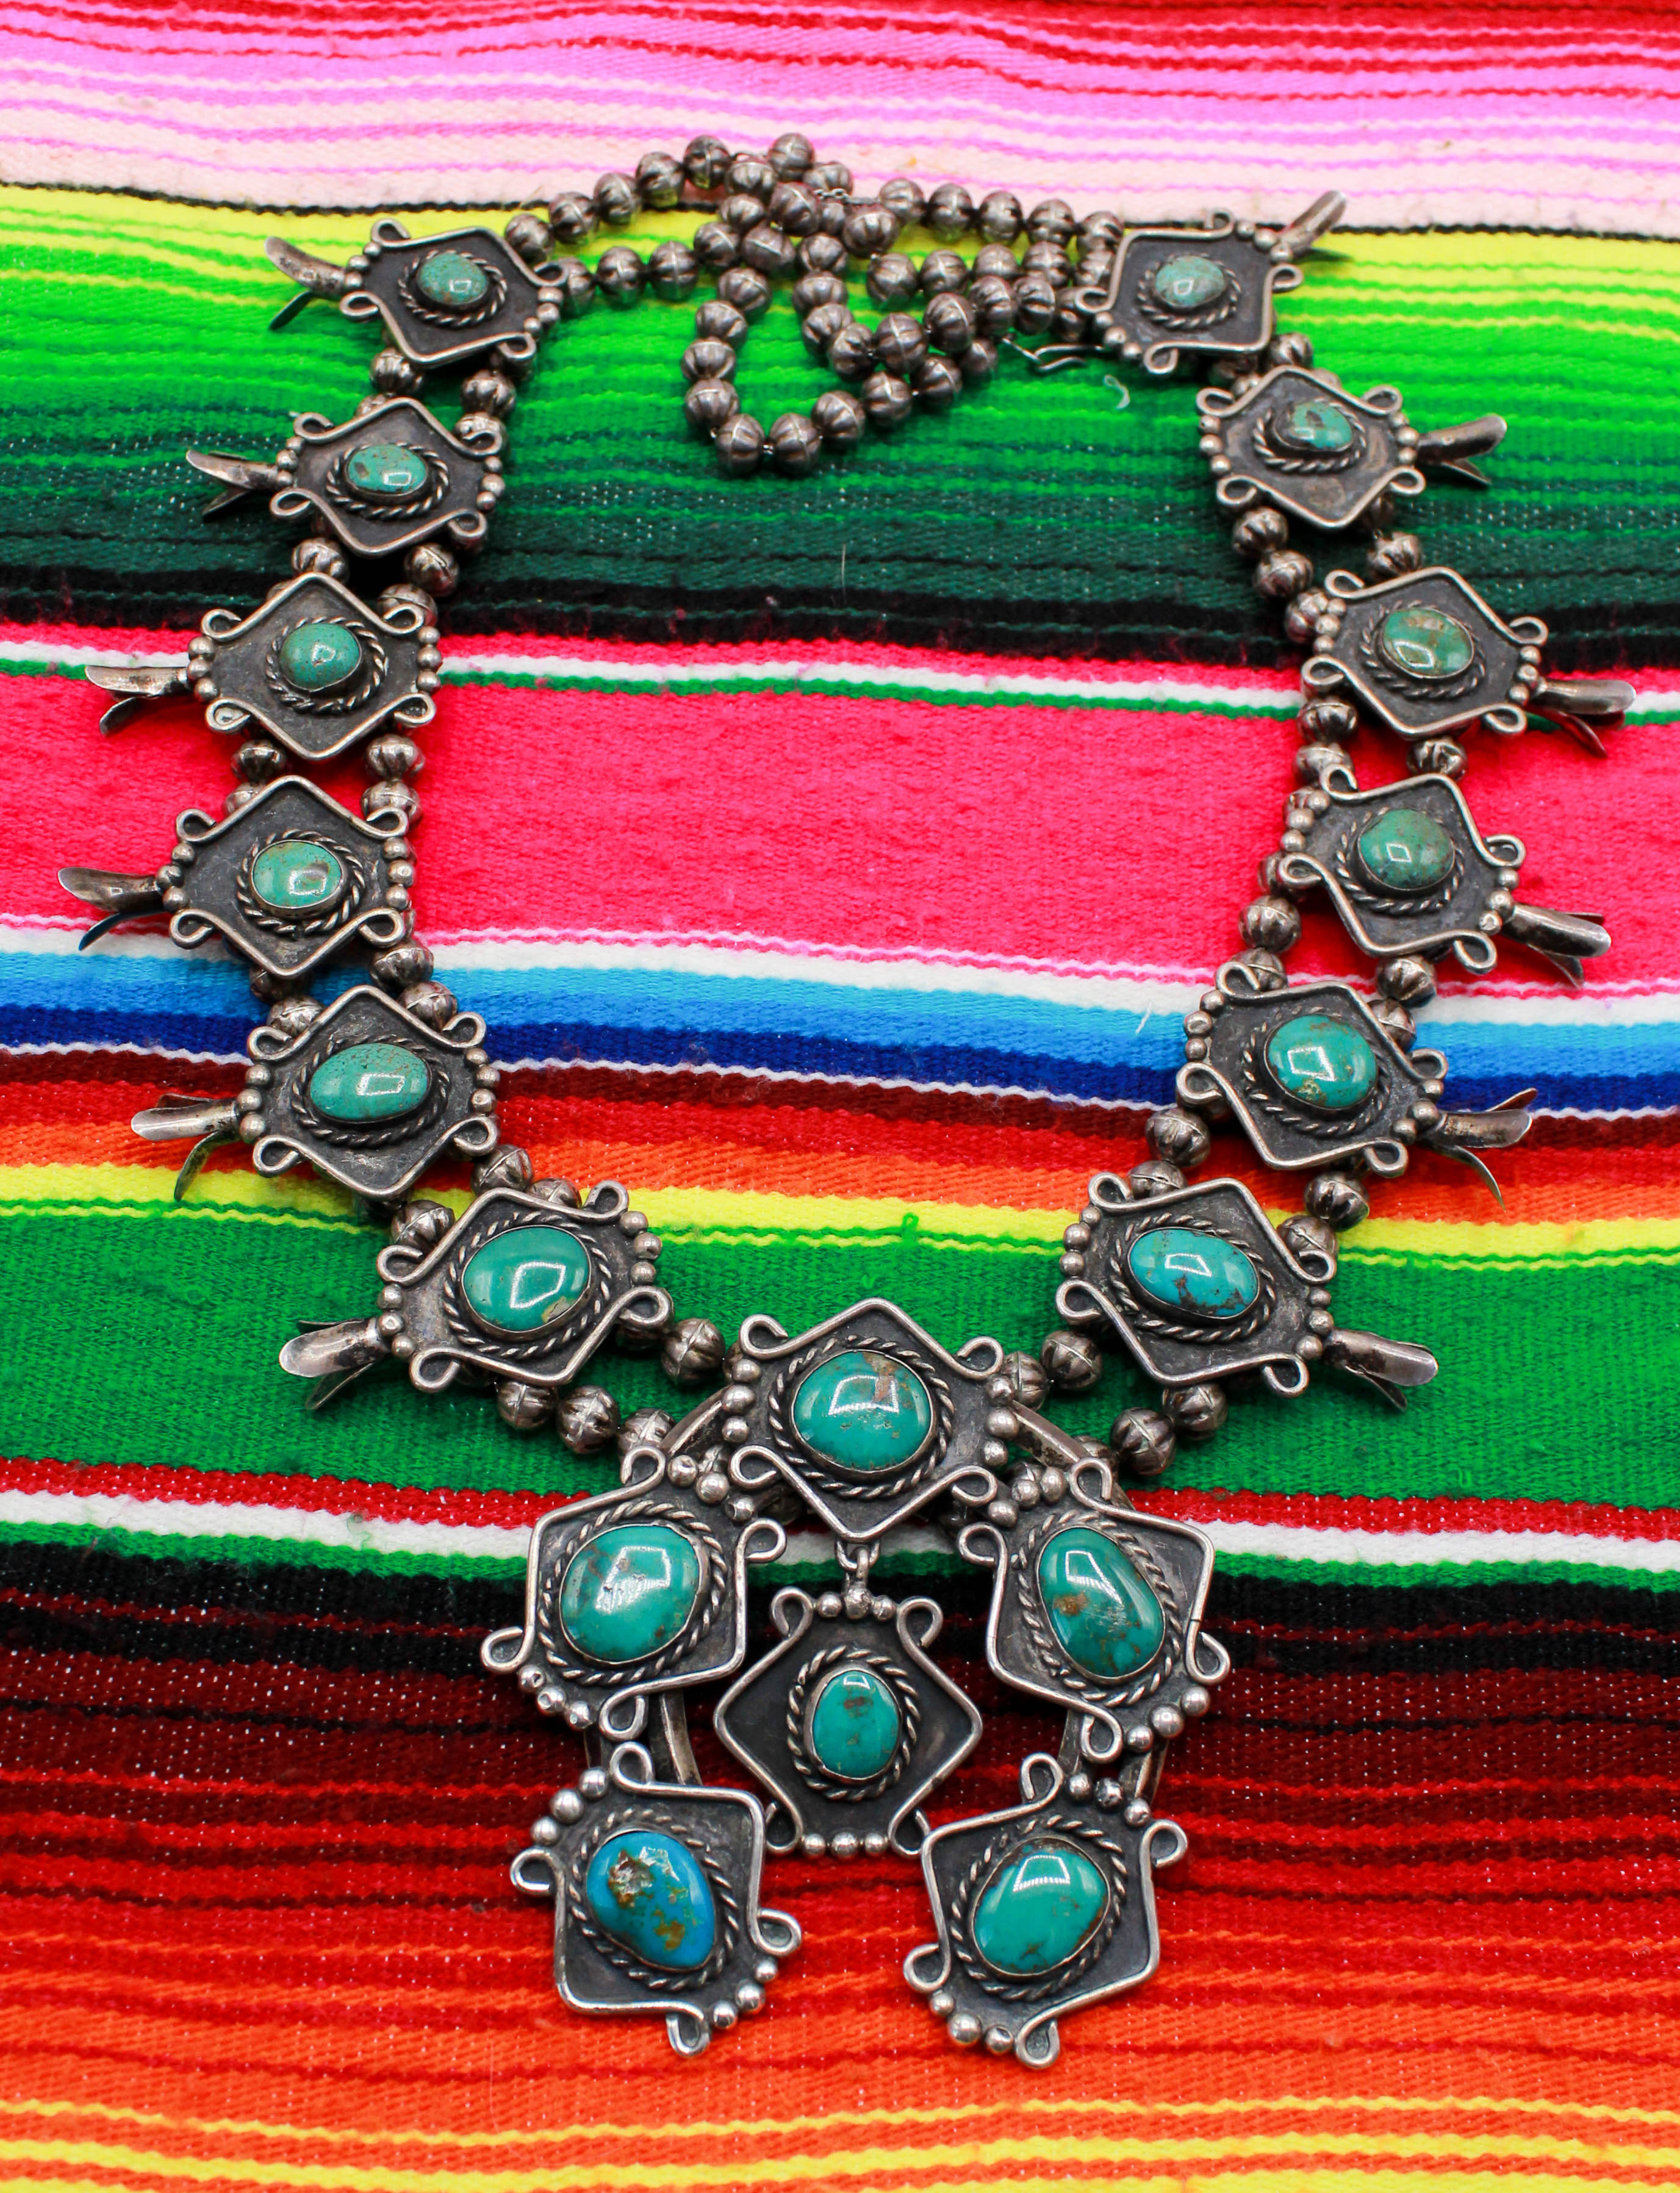 Genuine Vintage Navajo Squash Blossom Necklace with Turquoise and Ster –  The Sundance Gallery